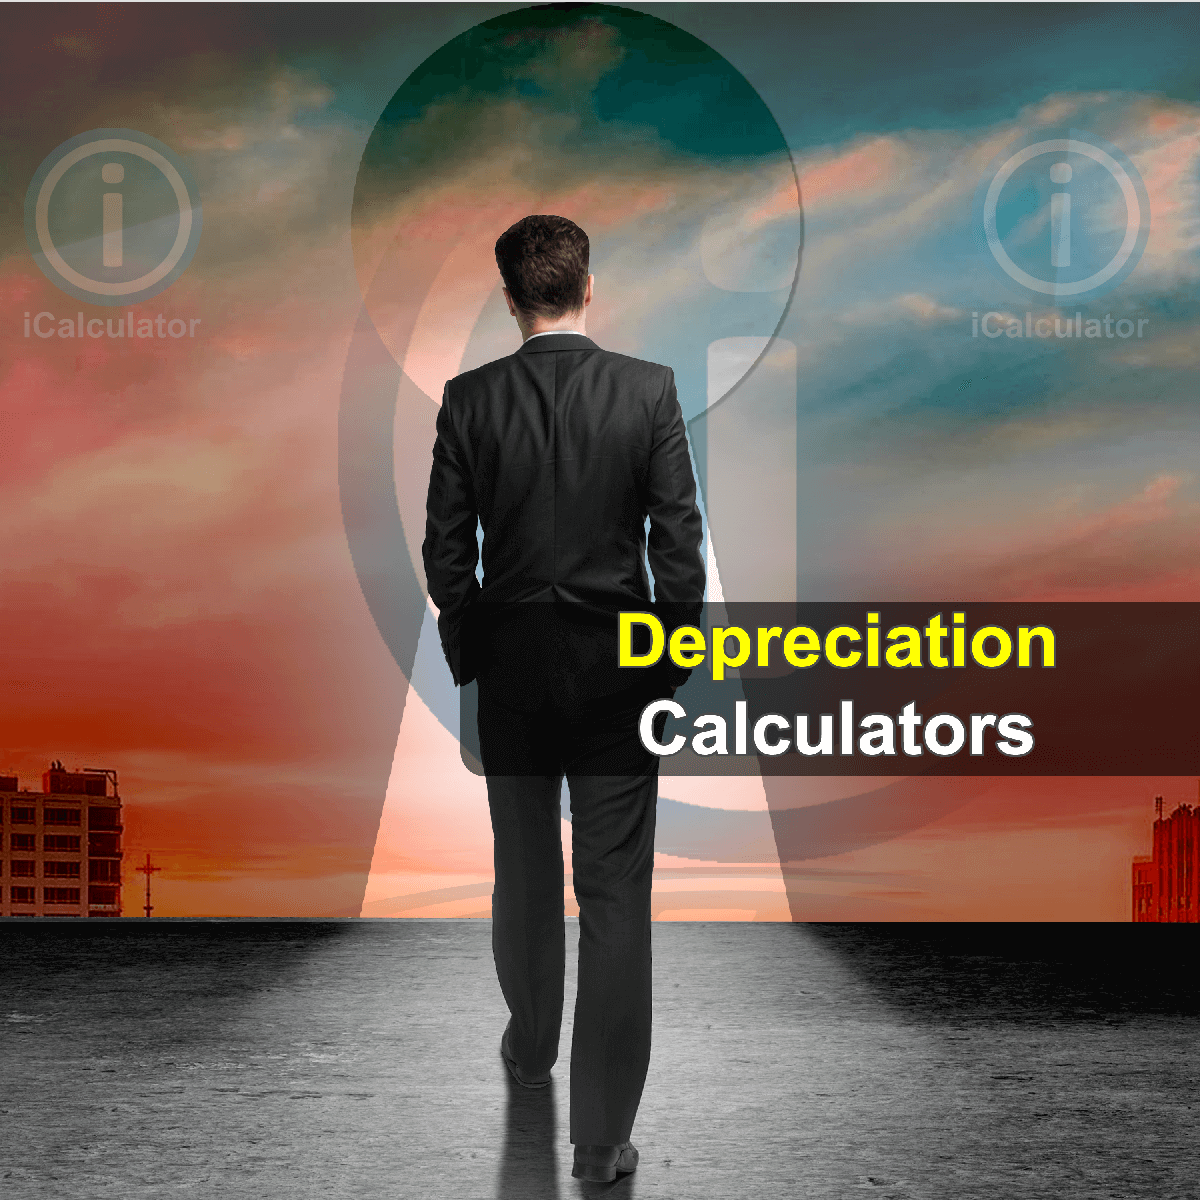 Depreciation Calculators. This image shows a an individual considering the merits of an a long term asset purchase using the depreciation calculators provided by iCalculator. 